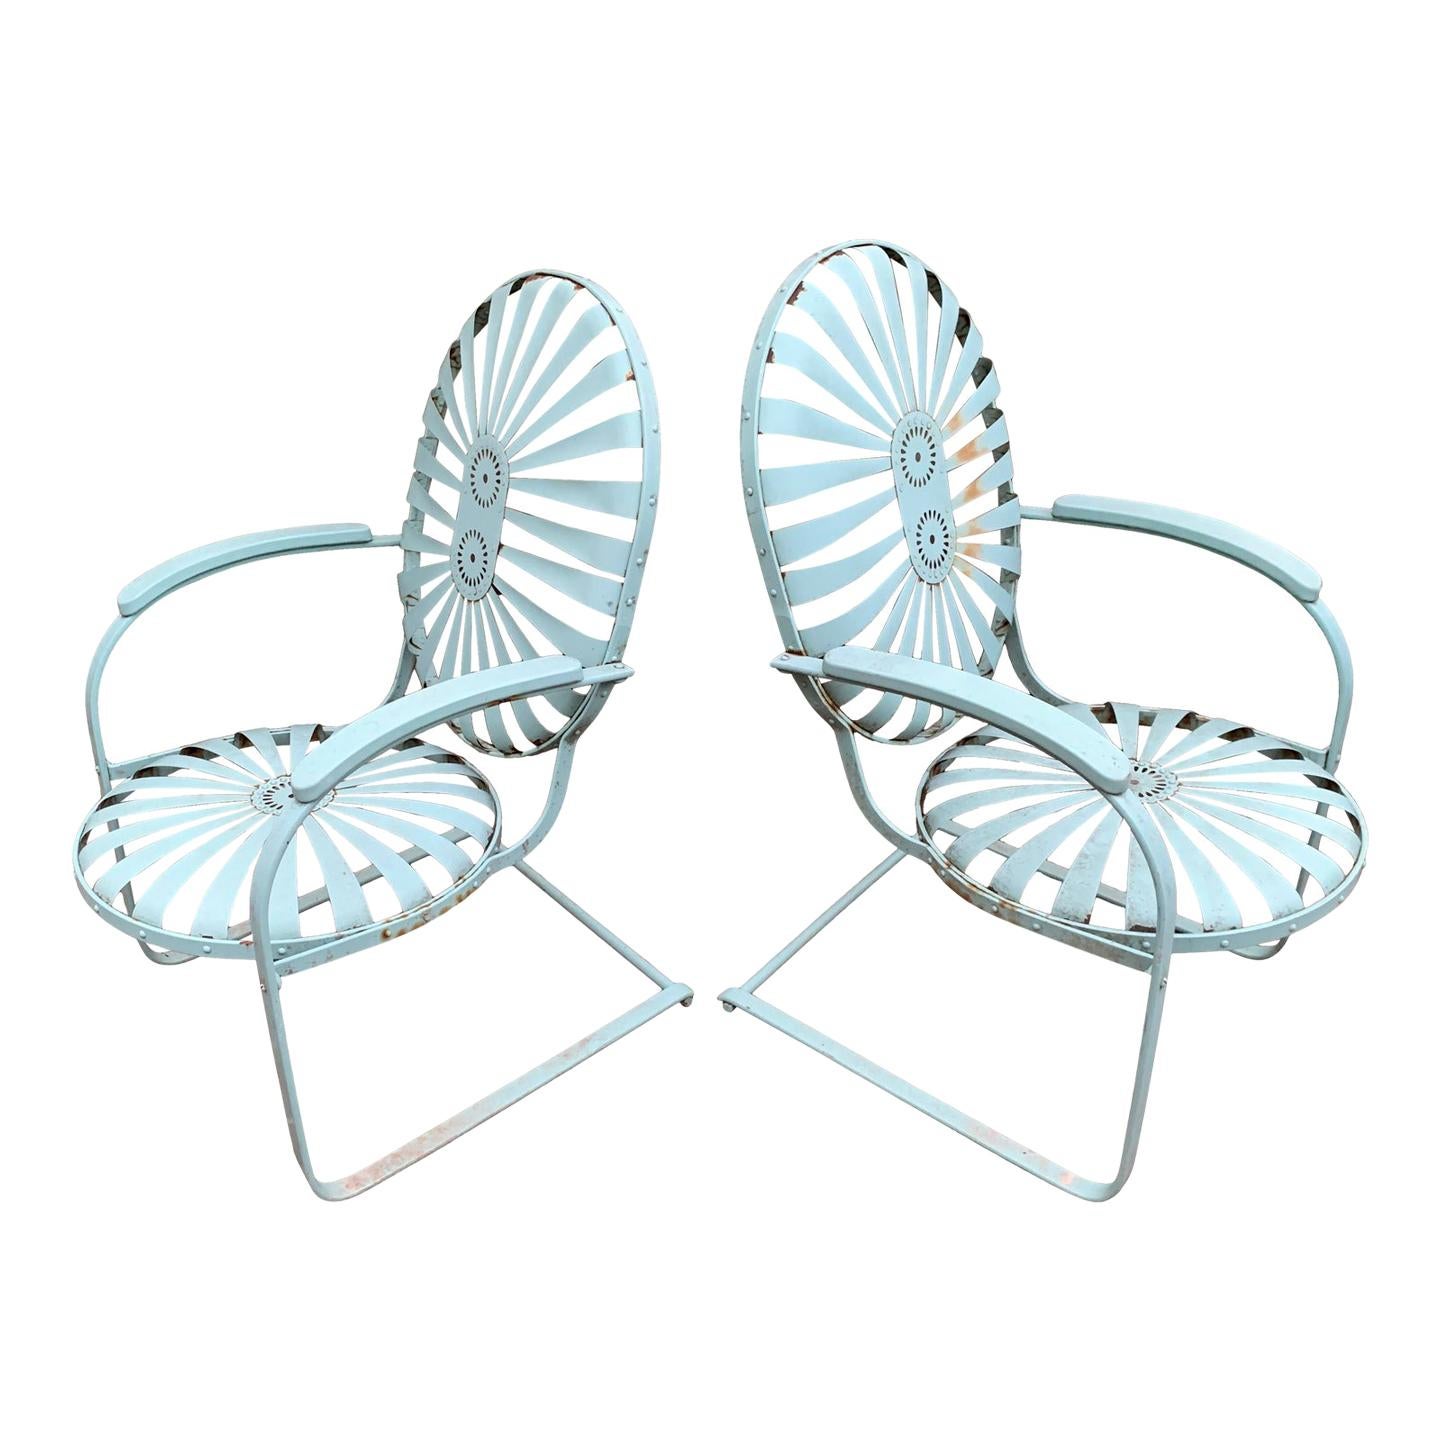 Original French Steel Lounge Chairs by Francois Carre